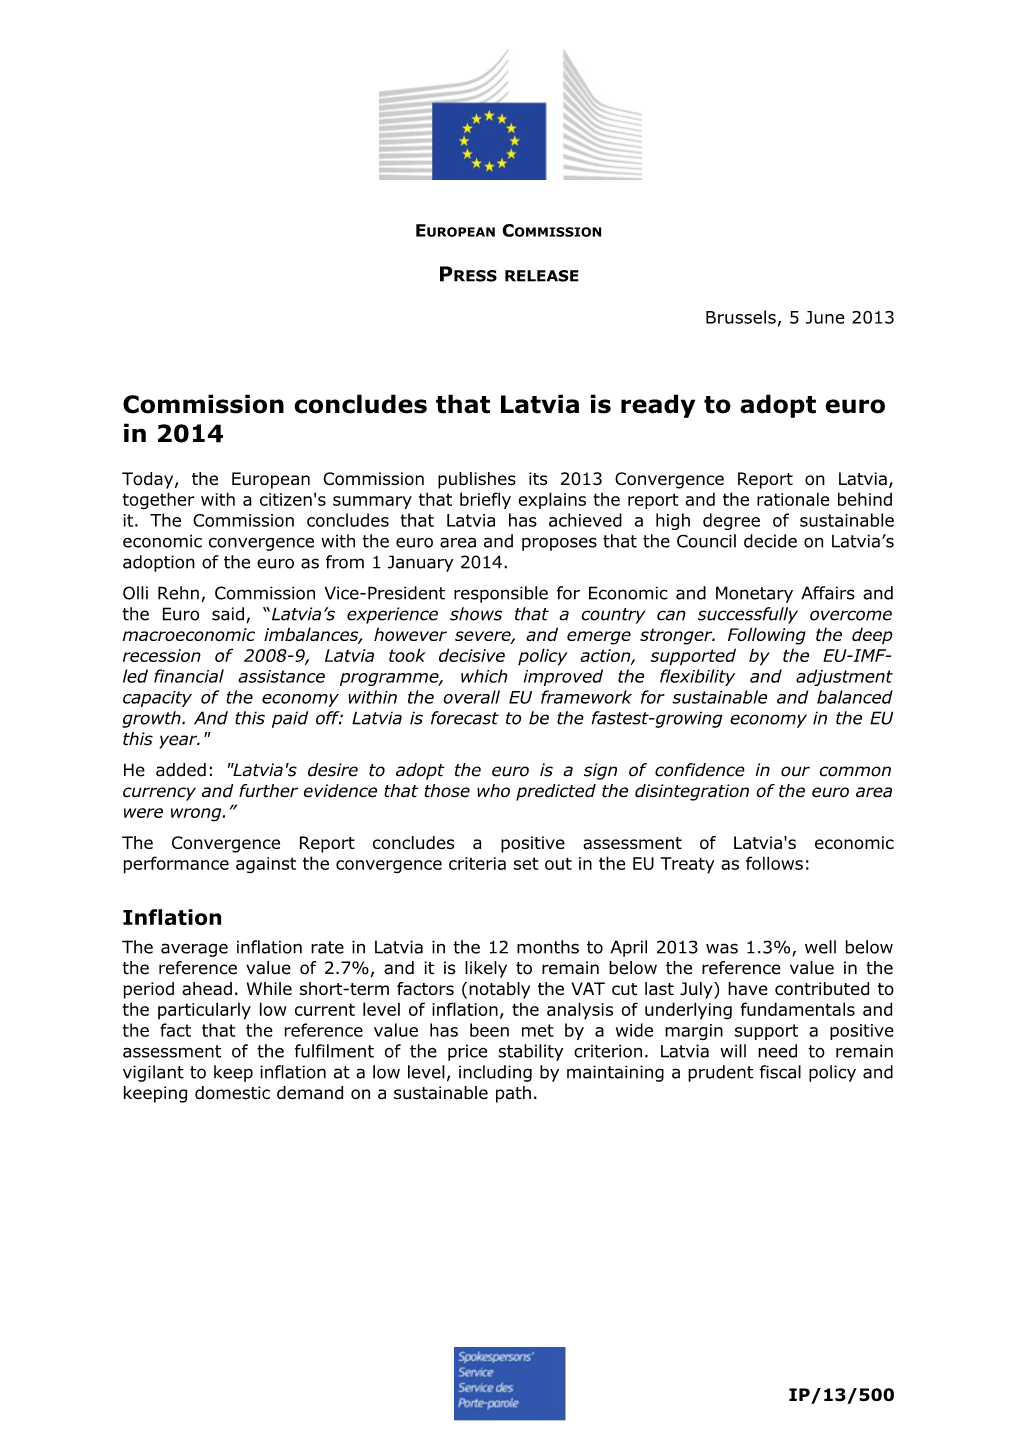 Commission Concludes That Latvia Is Ready to Adopt Euro in 2014